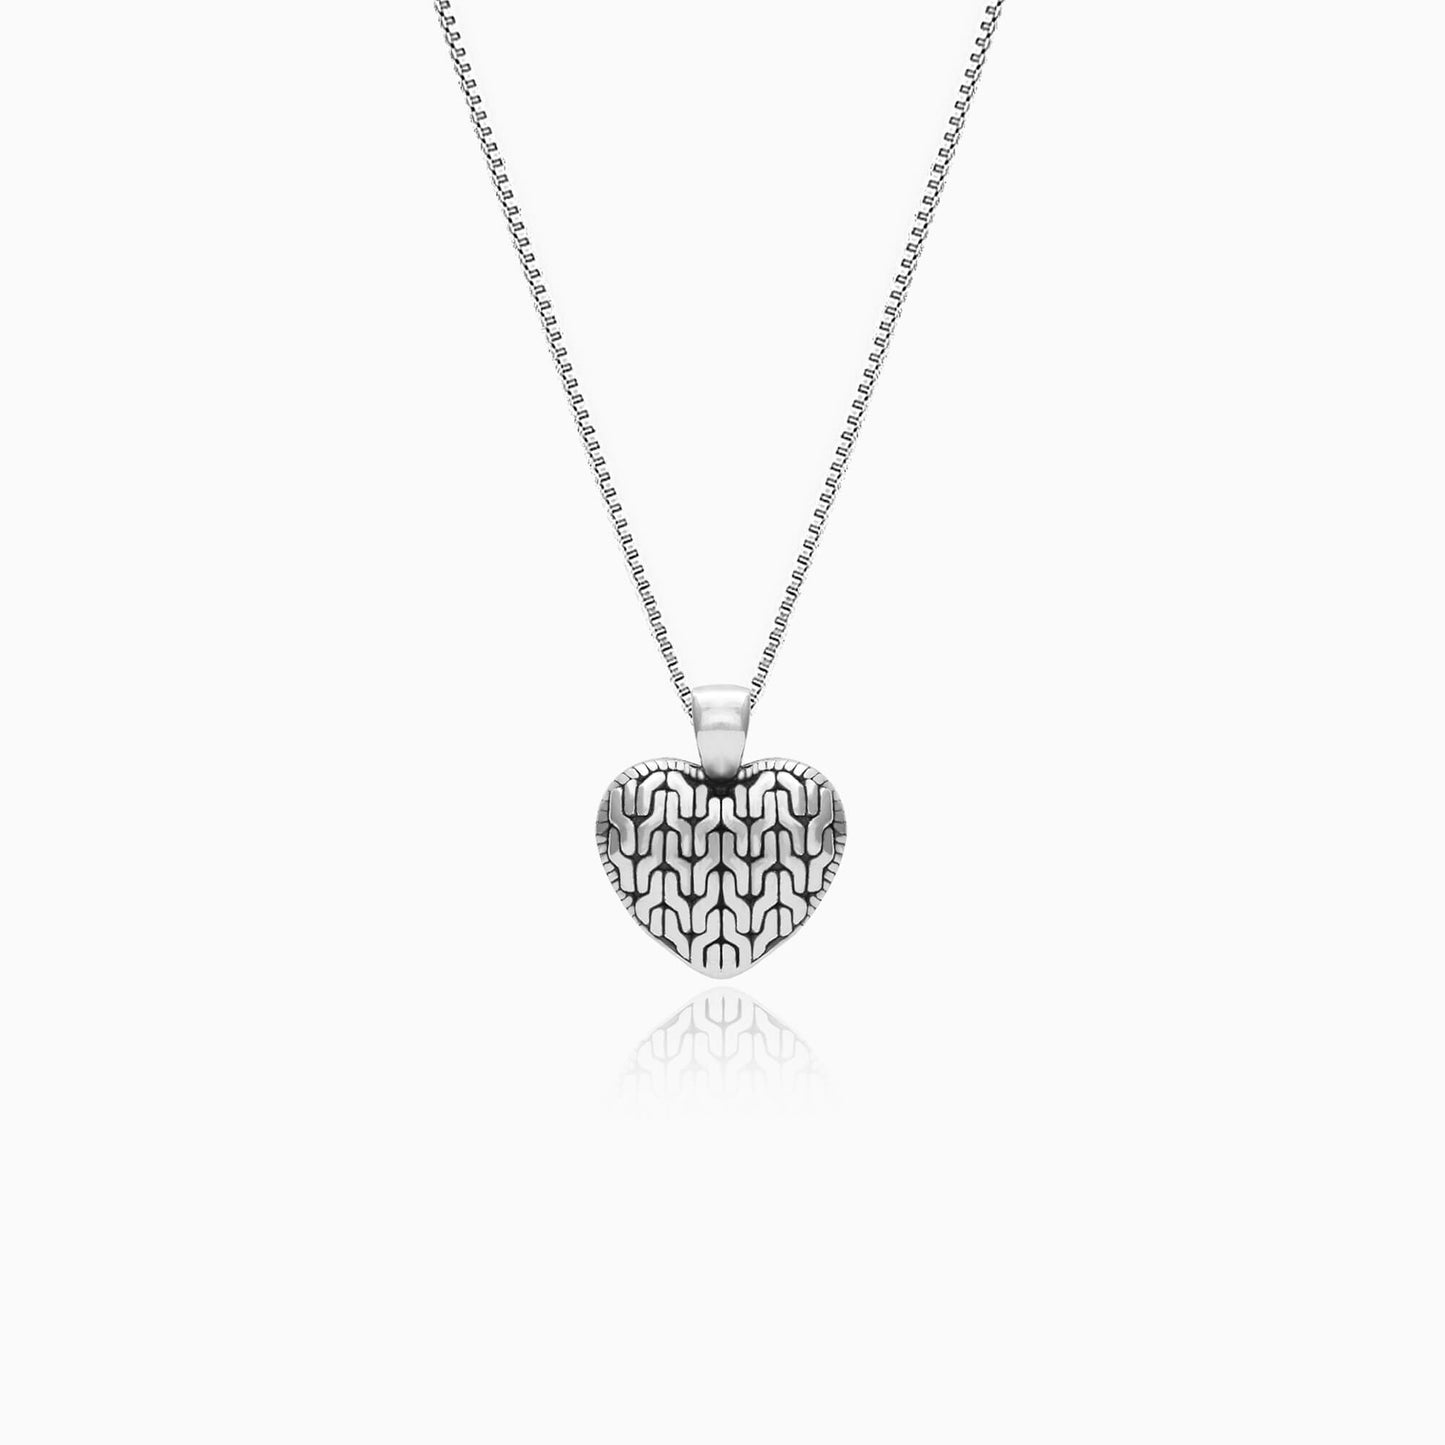 Oxidised Silver Charming Heart Pendant with Box Chain